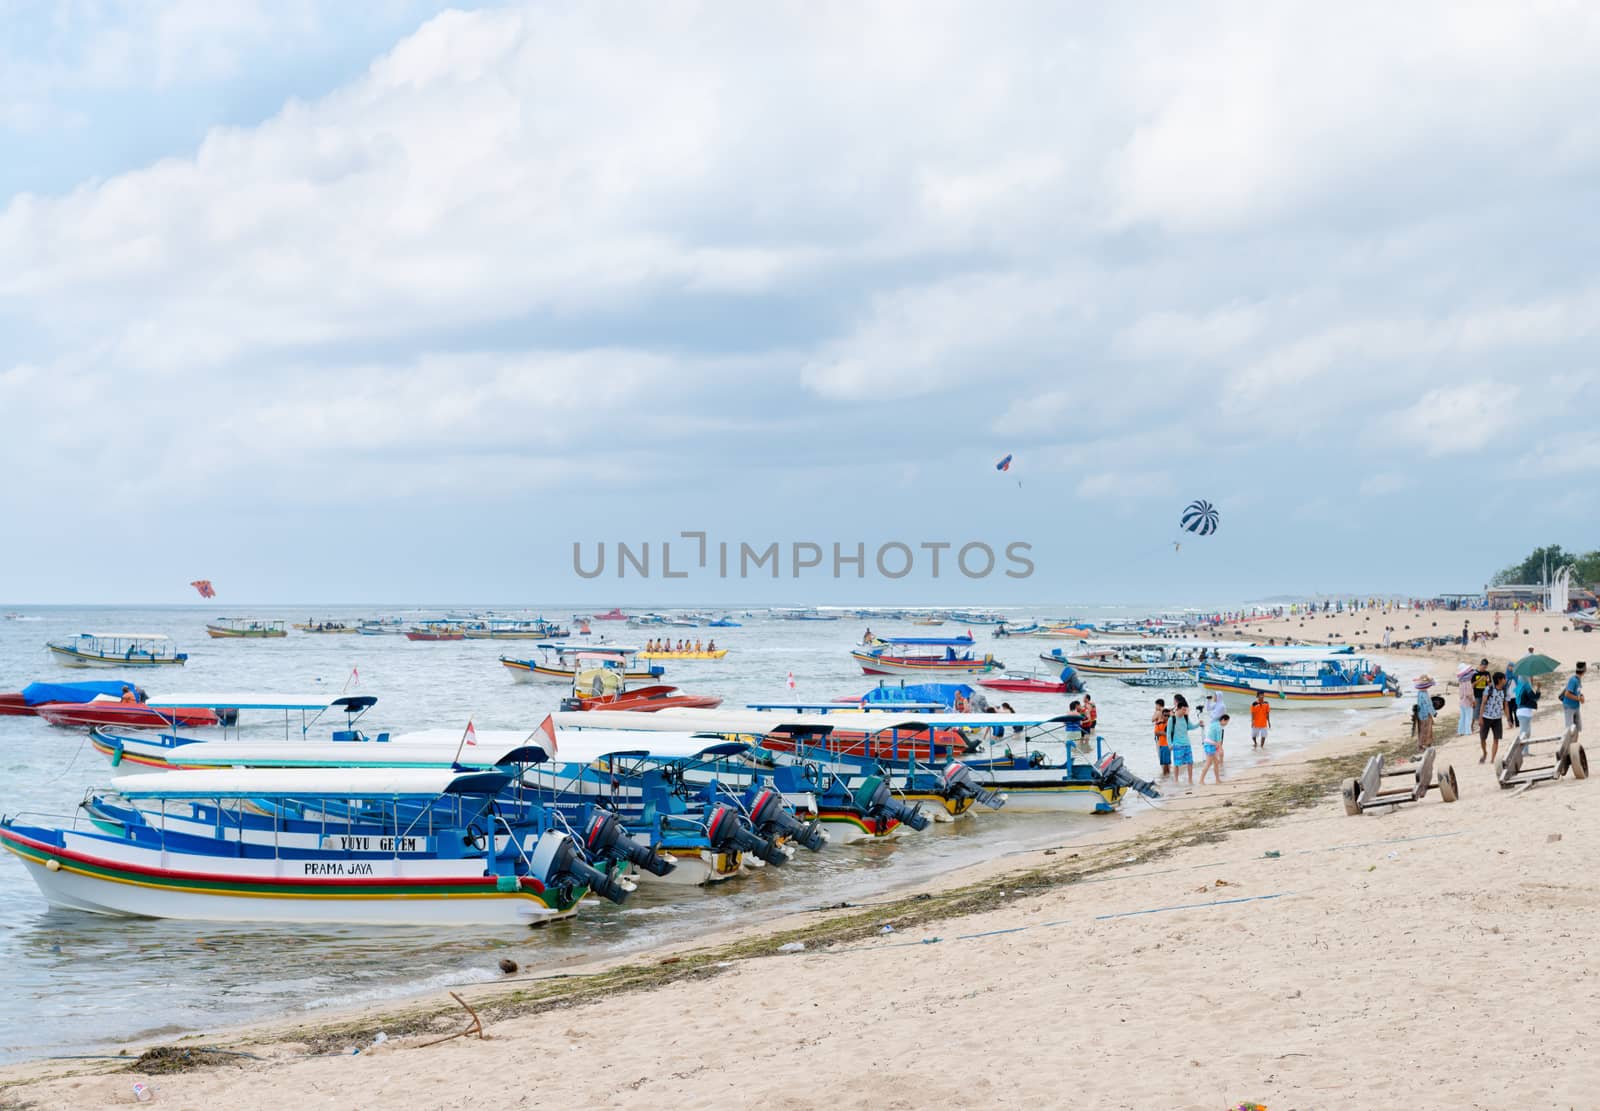 NUSA DUA, BALI - SEP 13: Motor boats on sand beach in Tanjung Benoa area on Sep 13, 2012 in Nusa Dua, Bali. Tanjung Benoa is popular tourist place for  watersport and various games.